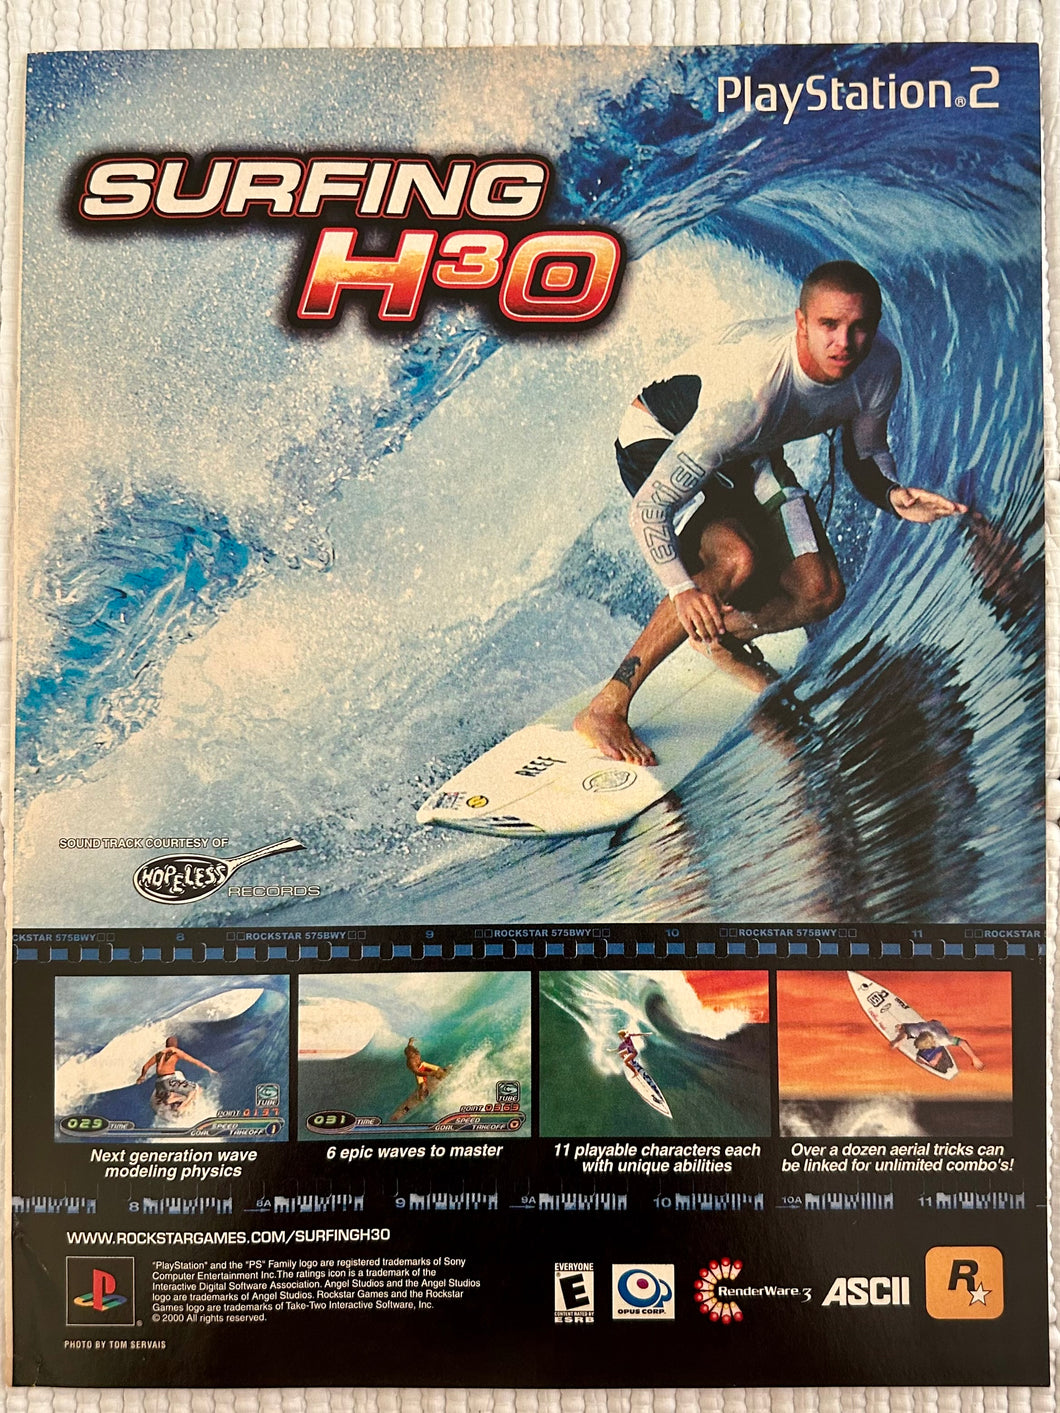 Surfing H3O - PS2 - Original Vintage Advertisement - Print Ads - Laminated A4 Poster